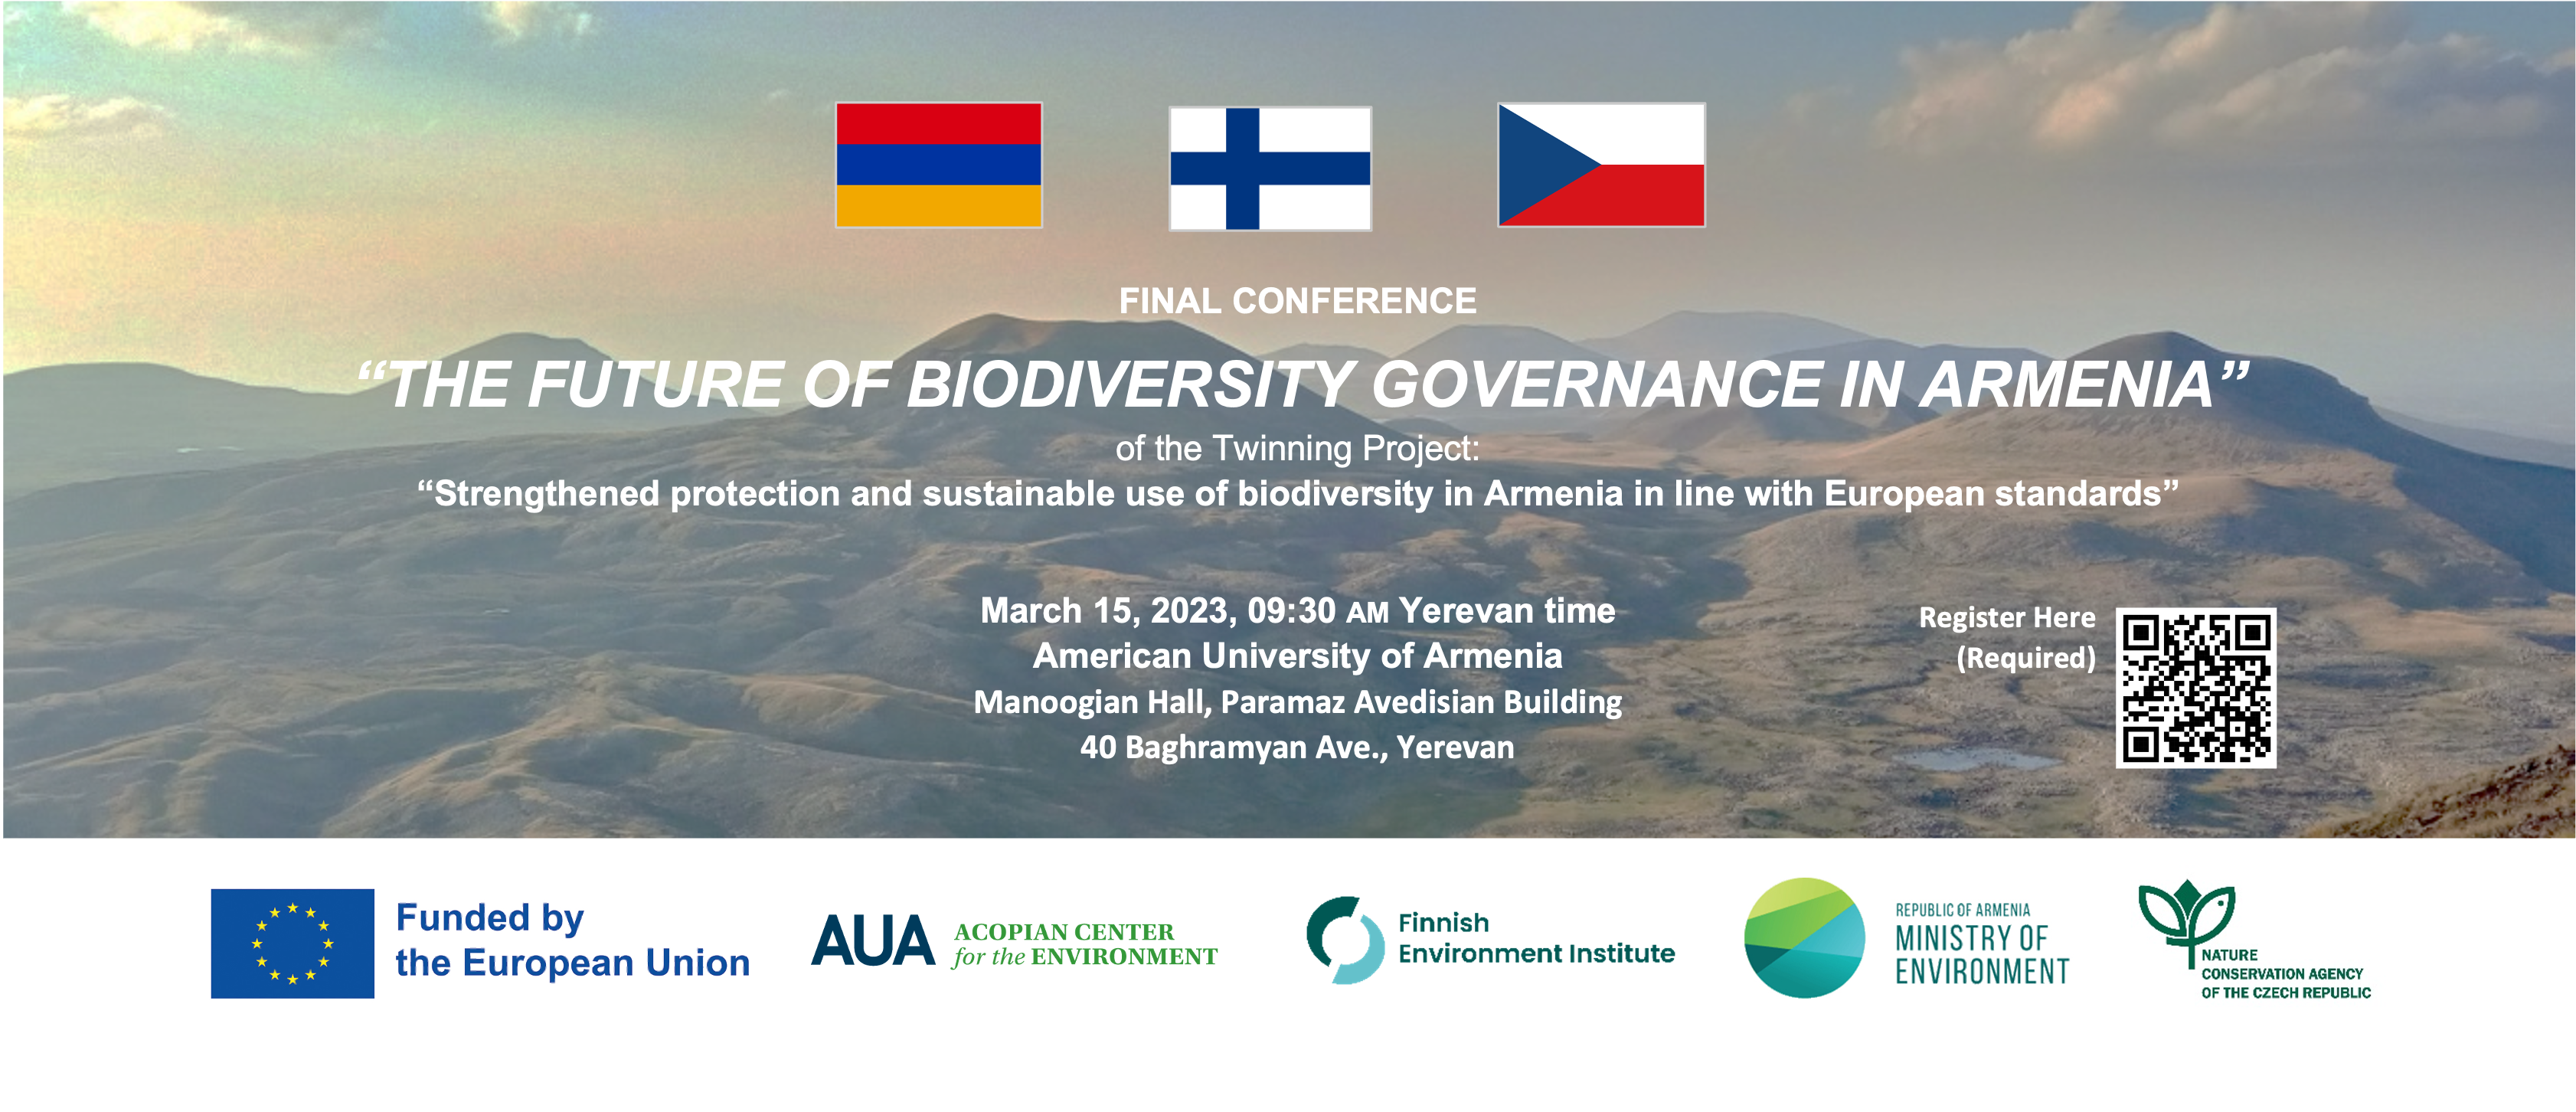 The Future of Biodiversity Governance in Armenia Conference